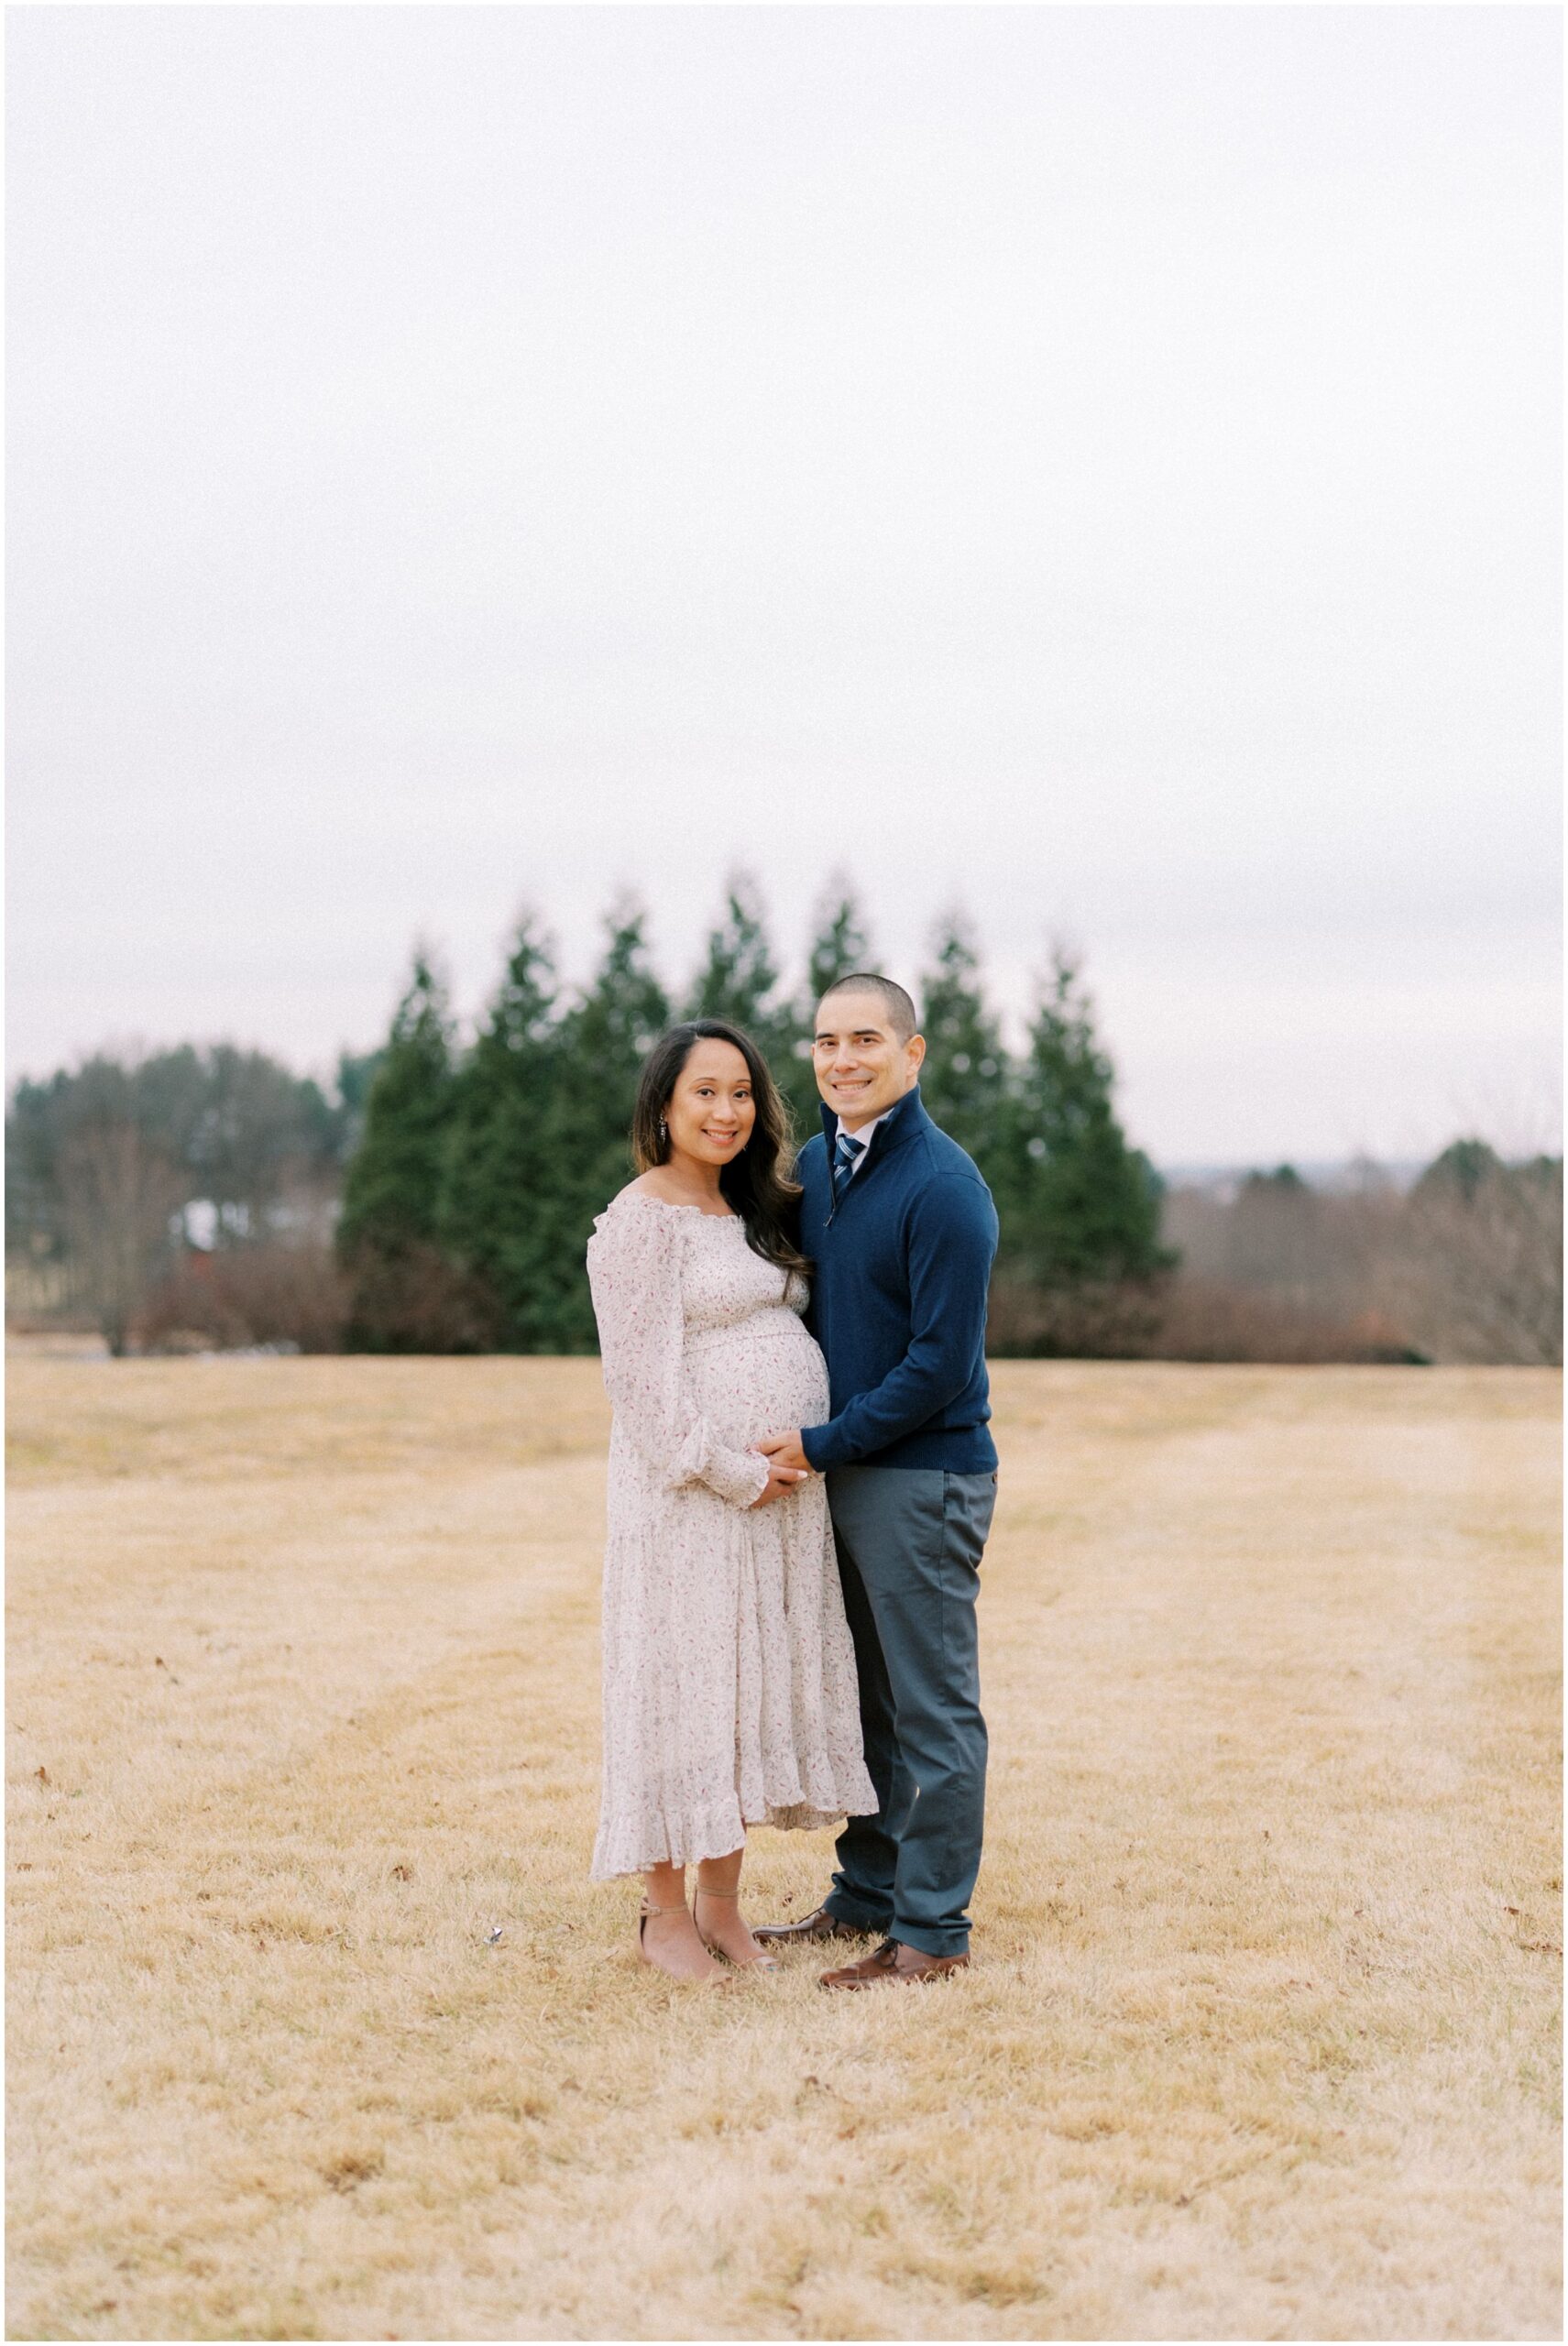 Maternity photos in Rockville, MD